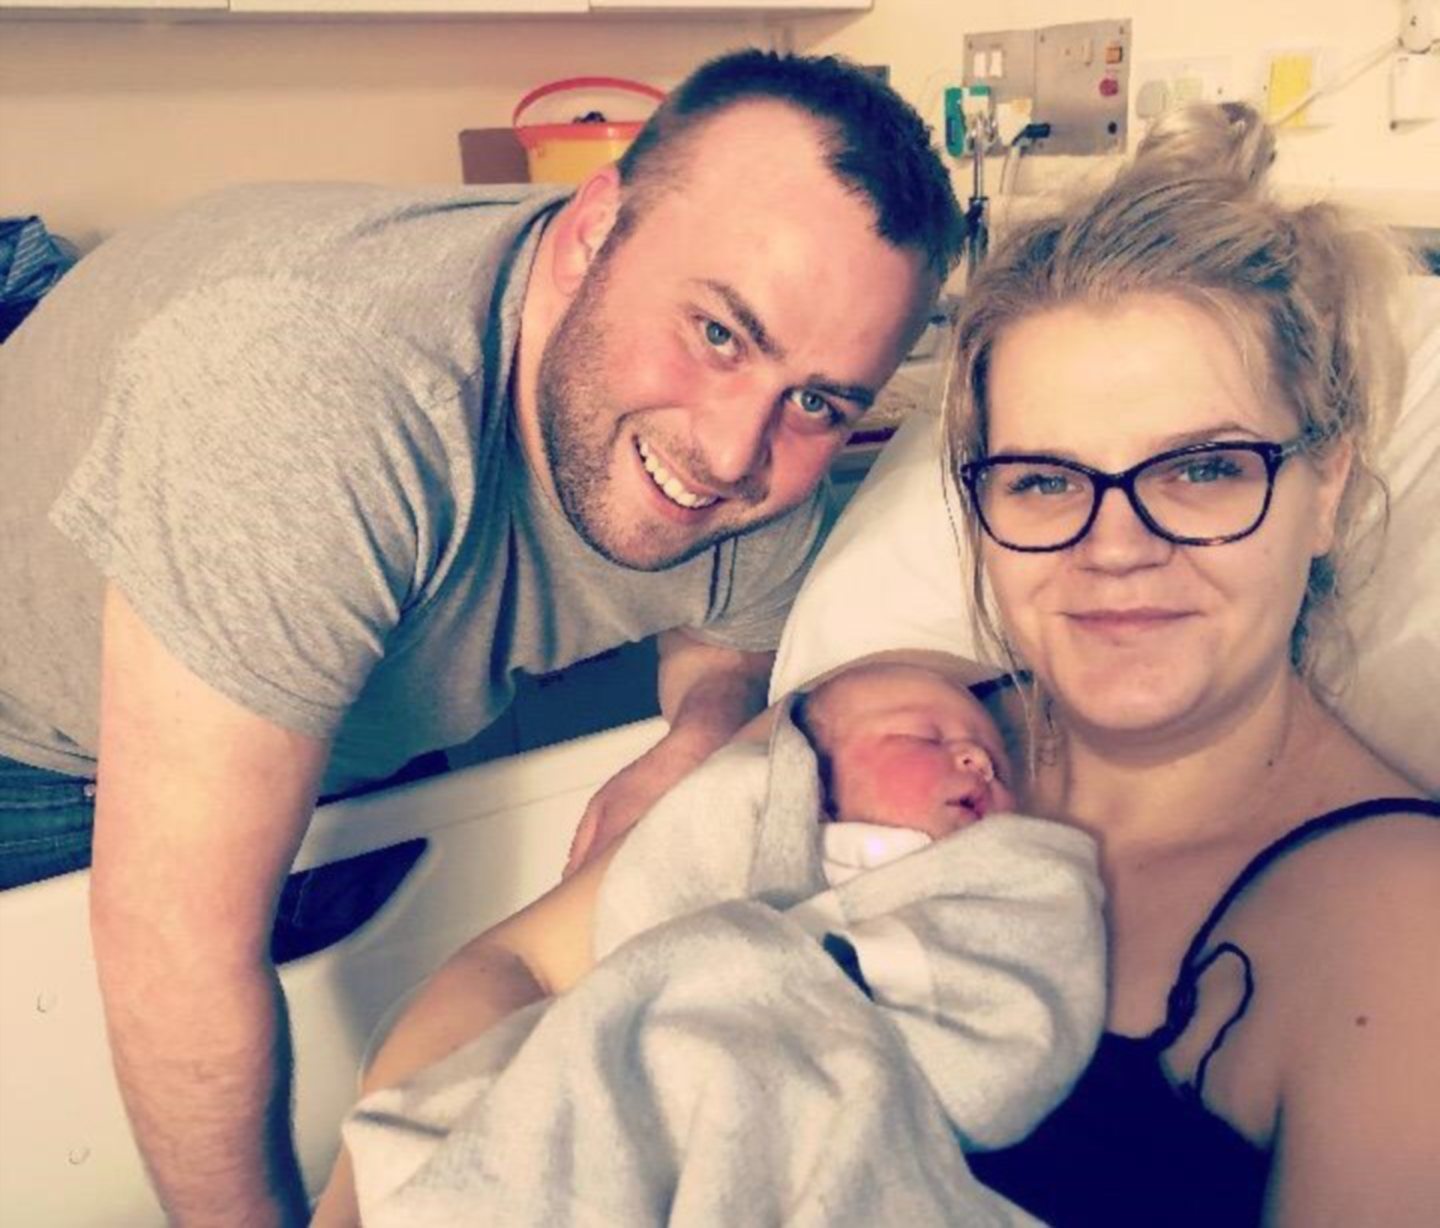 Daniel and Ashlie Lamb shortly after the birth of daughter Amelie.